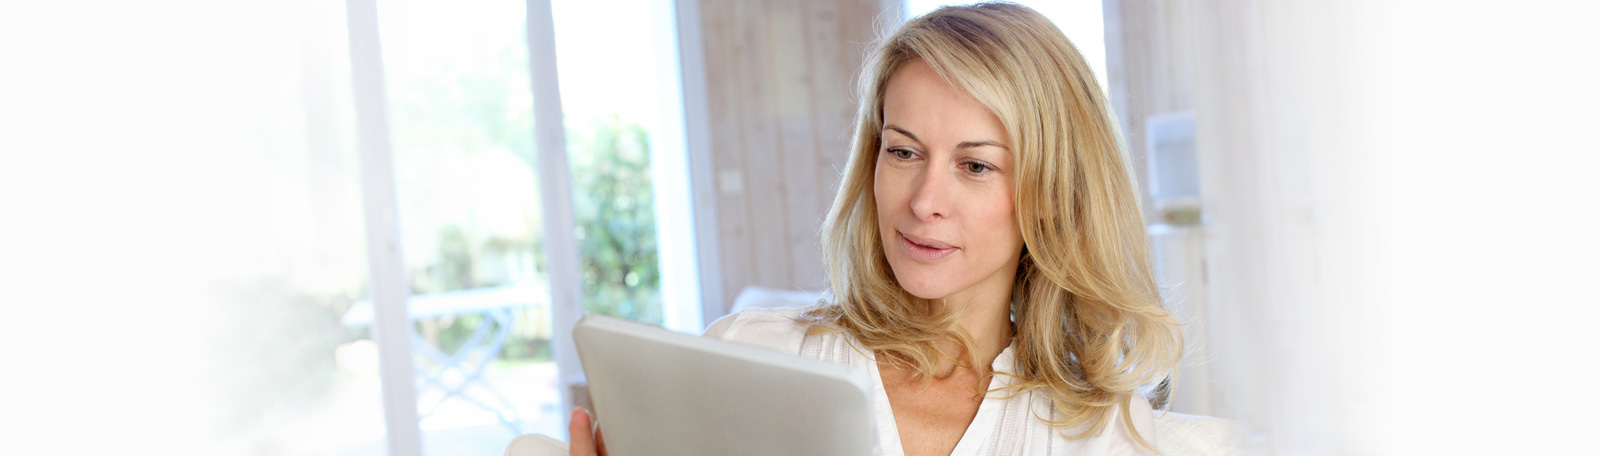 Woman using her tablet and looking interested